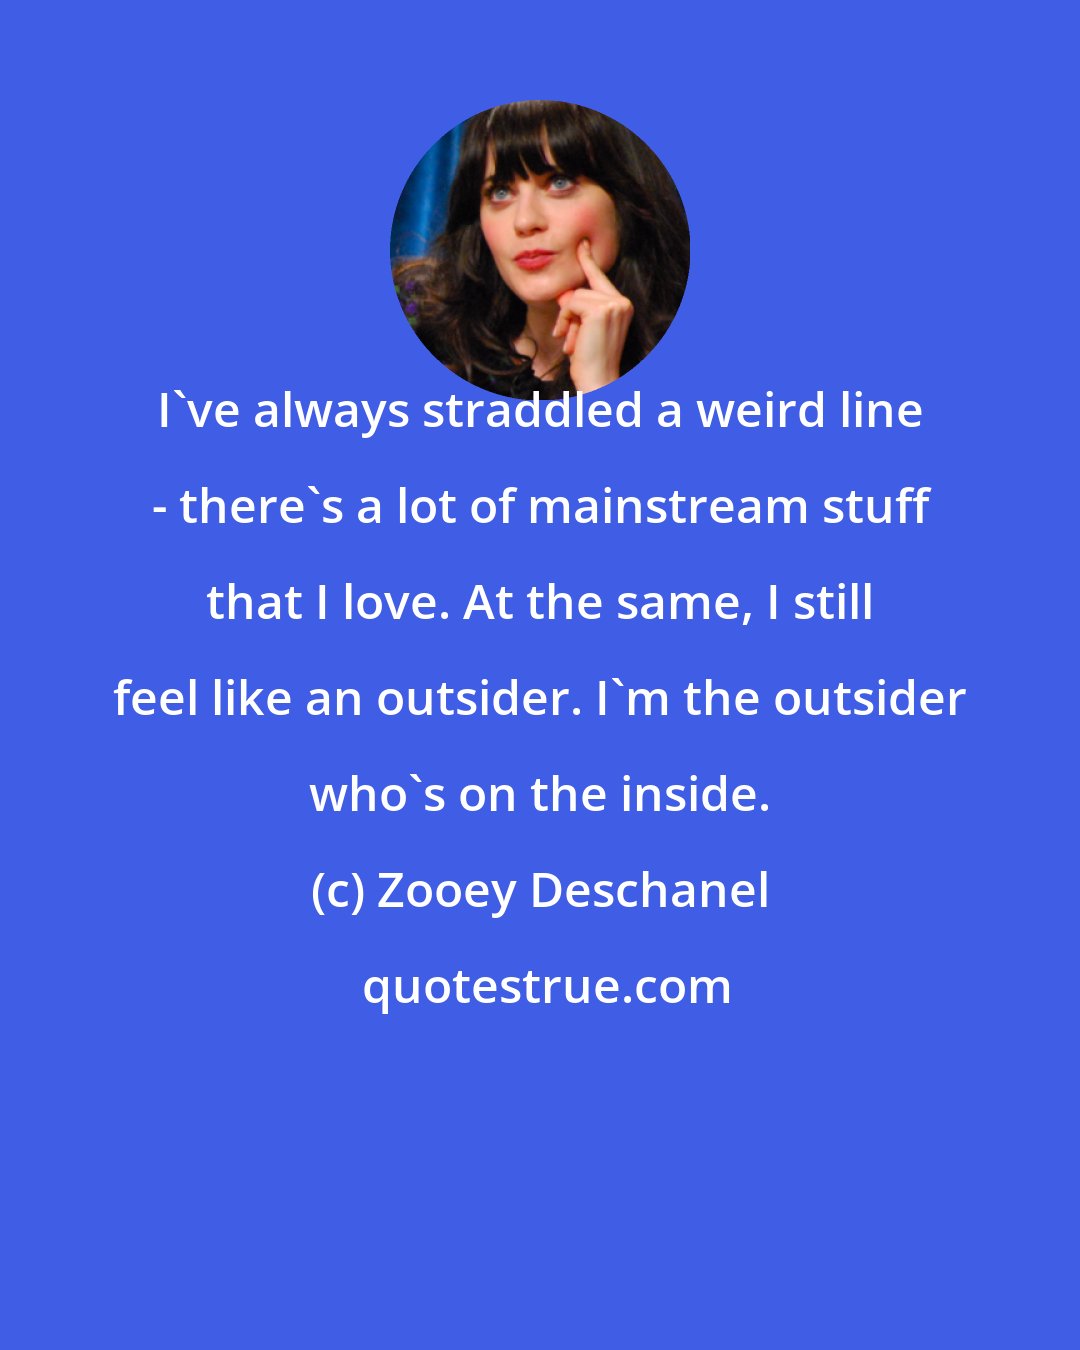 Zooey Deschanel: I've always straddled a weird line - there's a lot of mainstream stuff that I love. At the same, I still feel like an outsider. I'm the outsider who's on the inside.